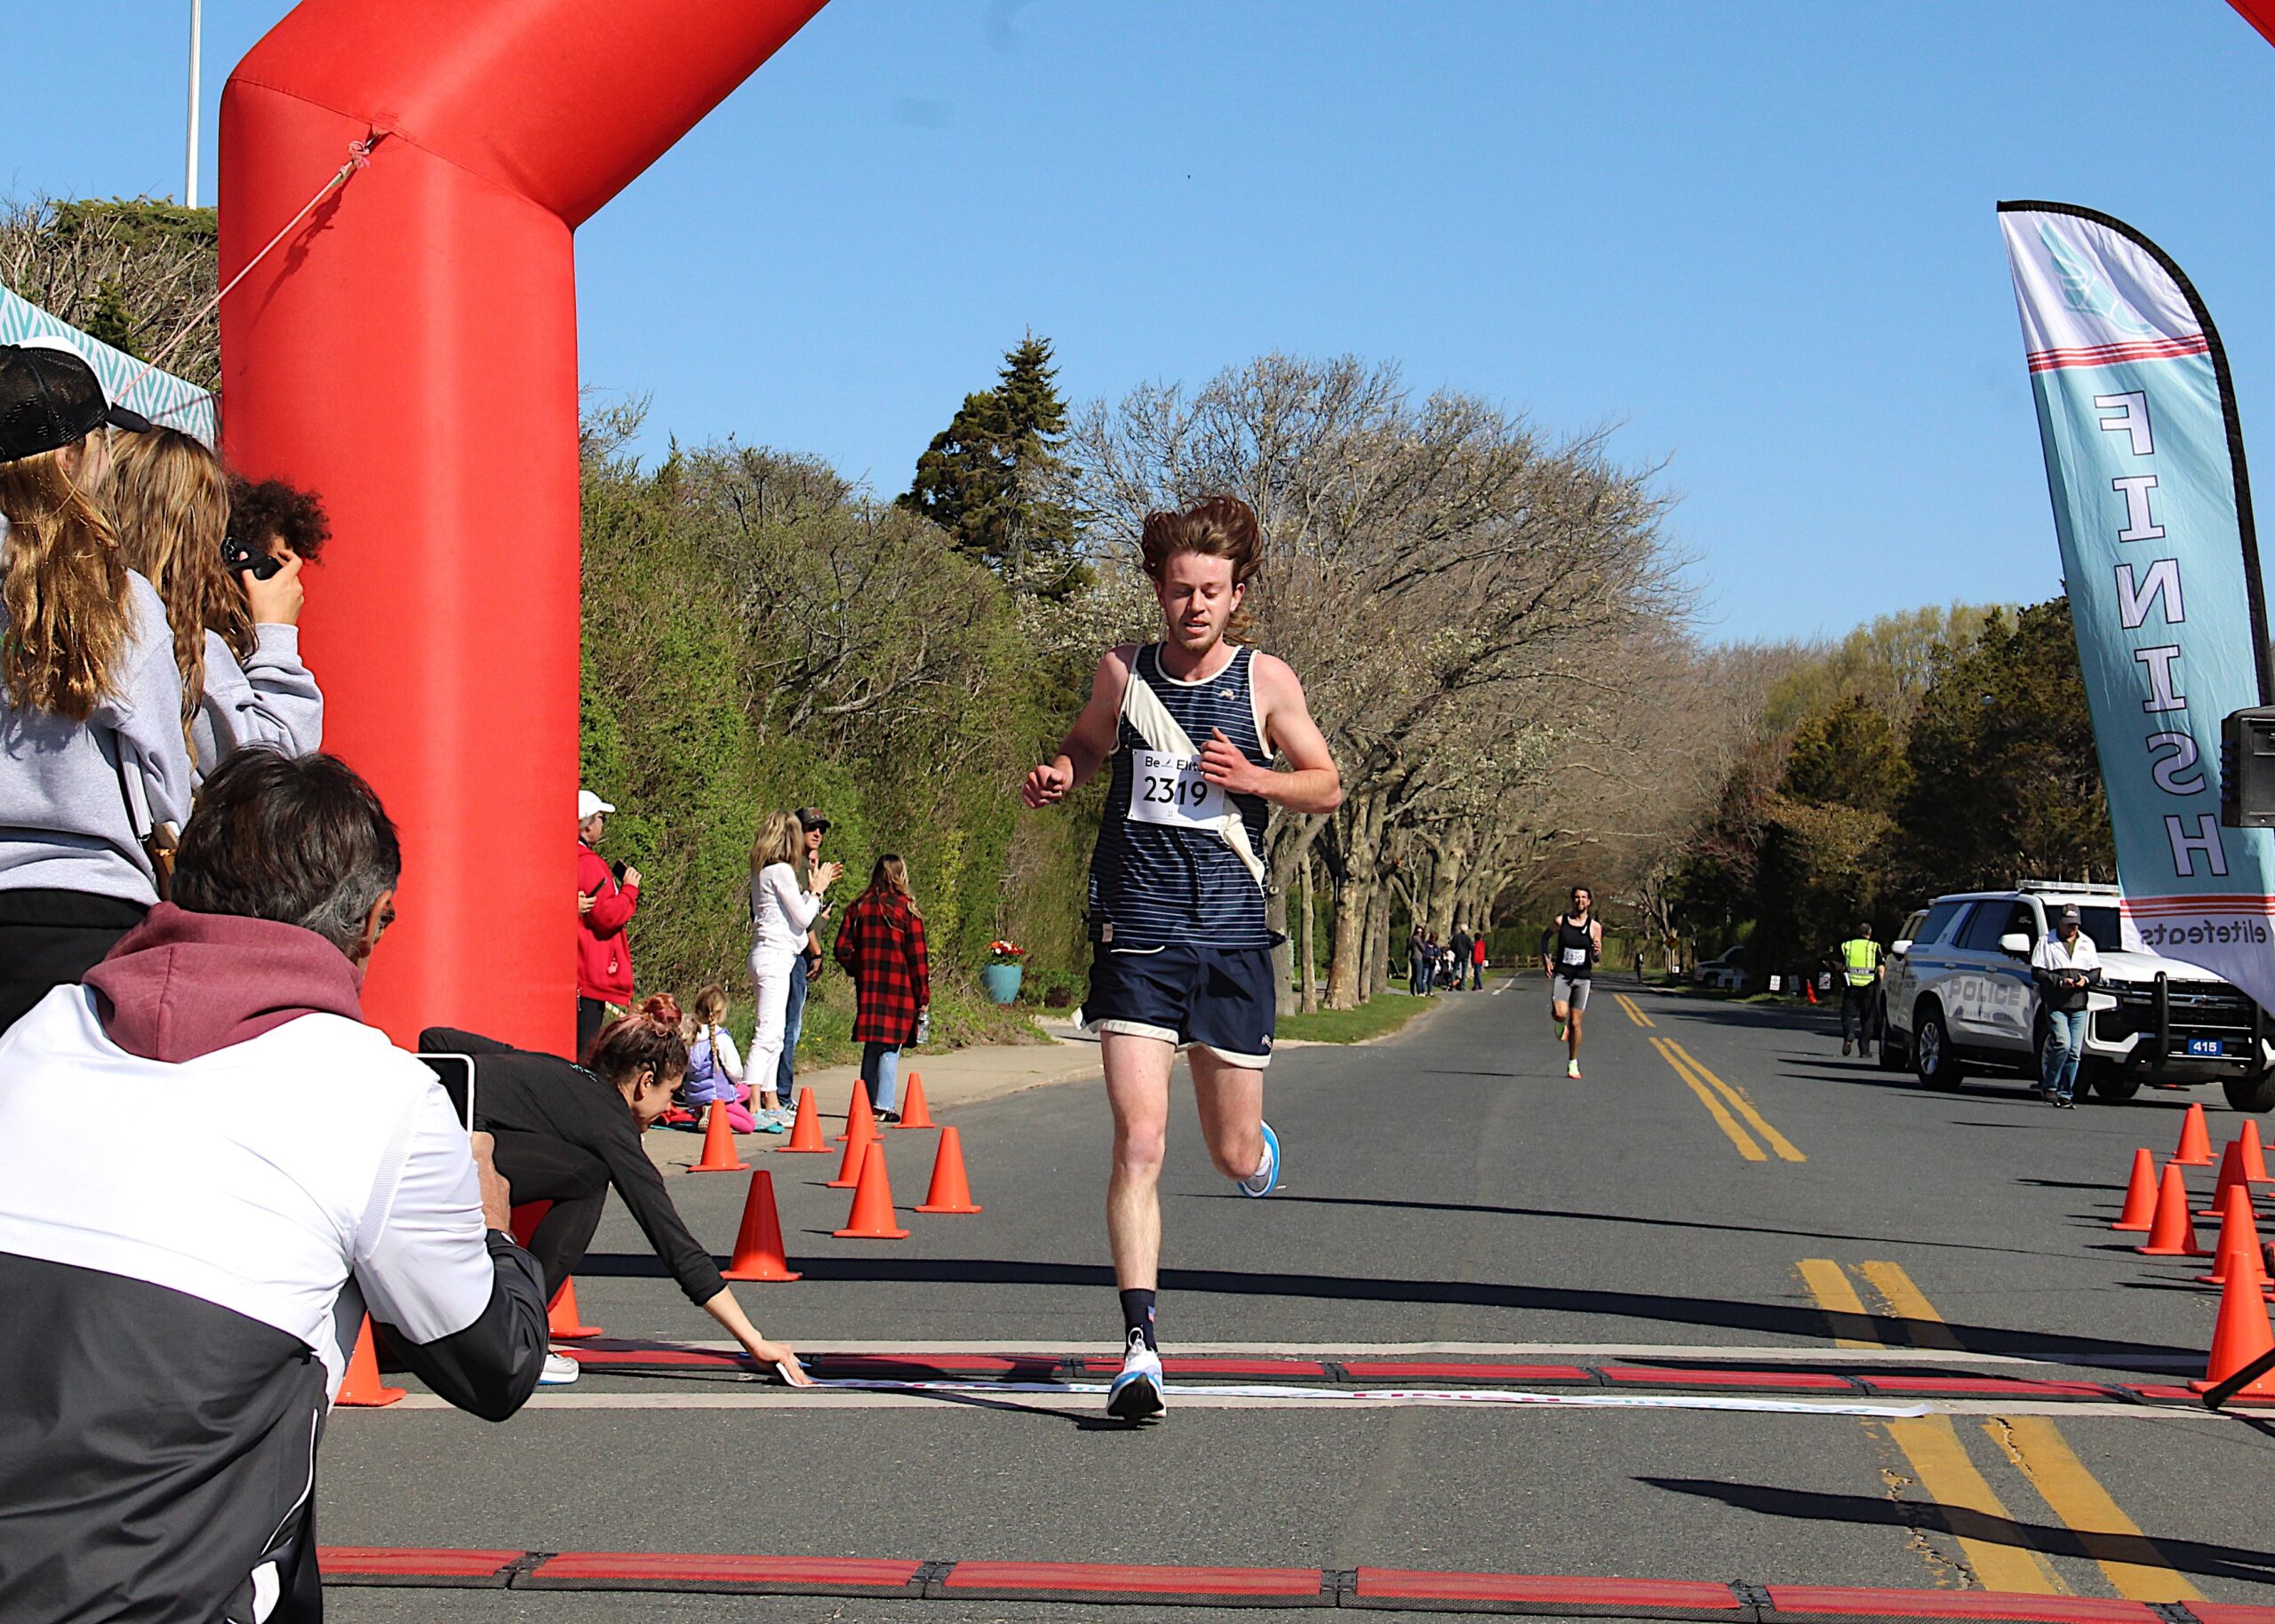 East Hampton native Erik Engstrom was the overall winner of Sunday's race.   KYRIL BROMLEY